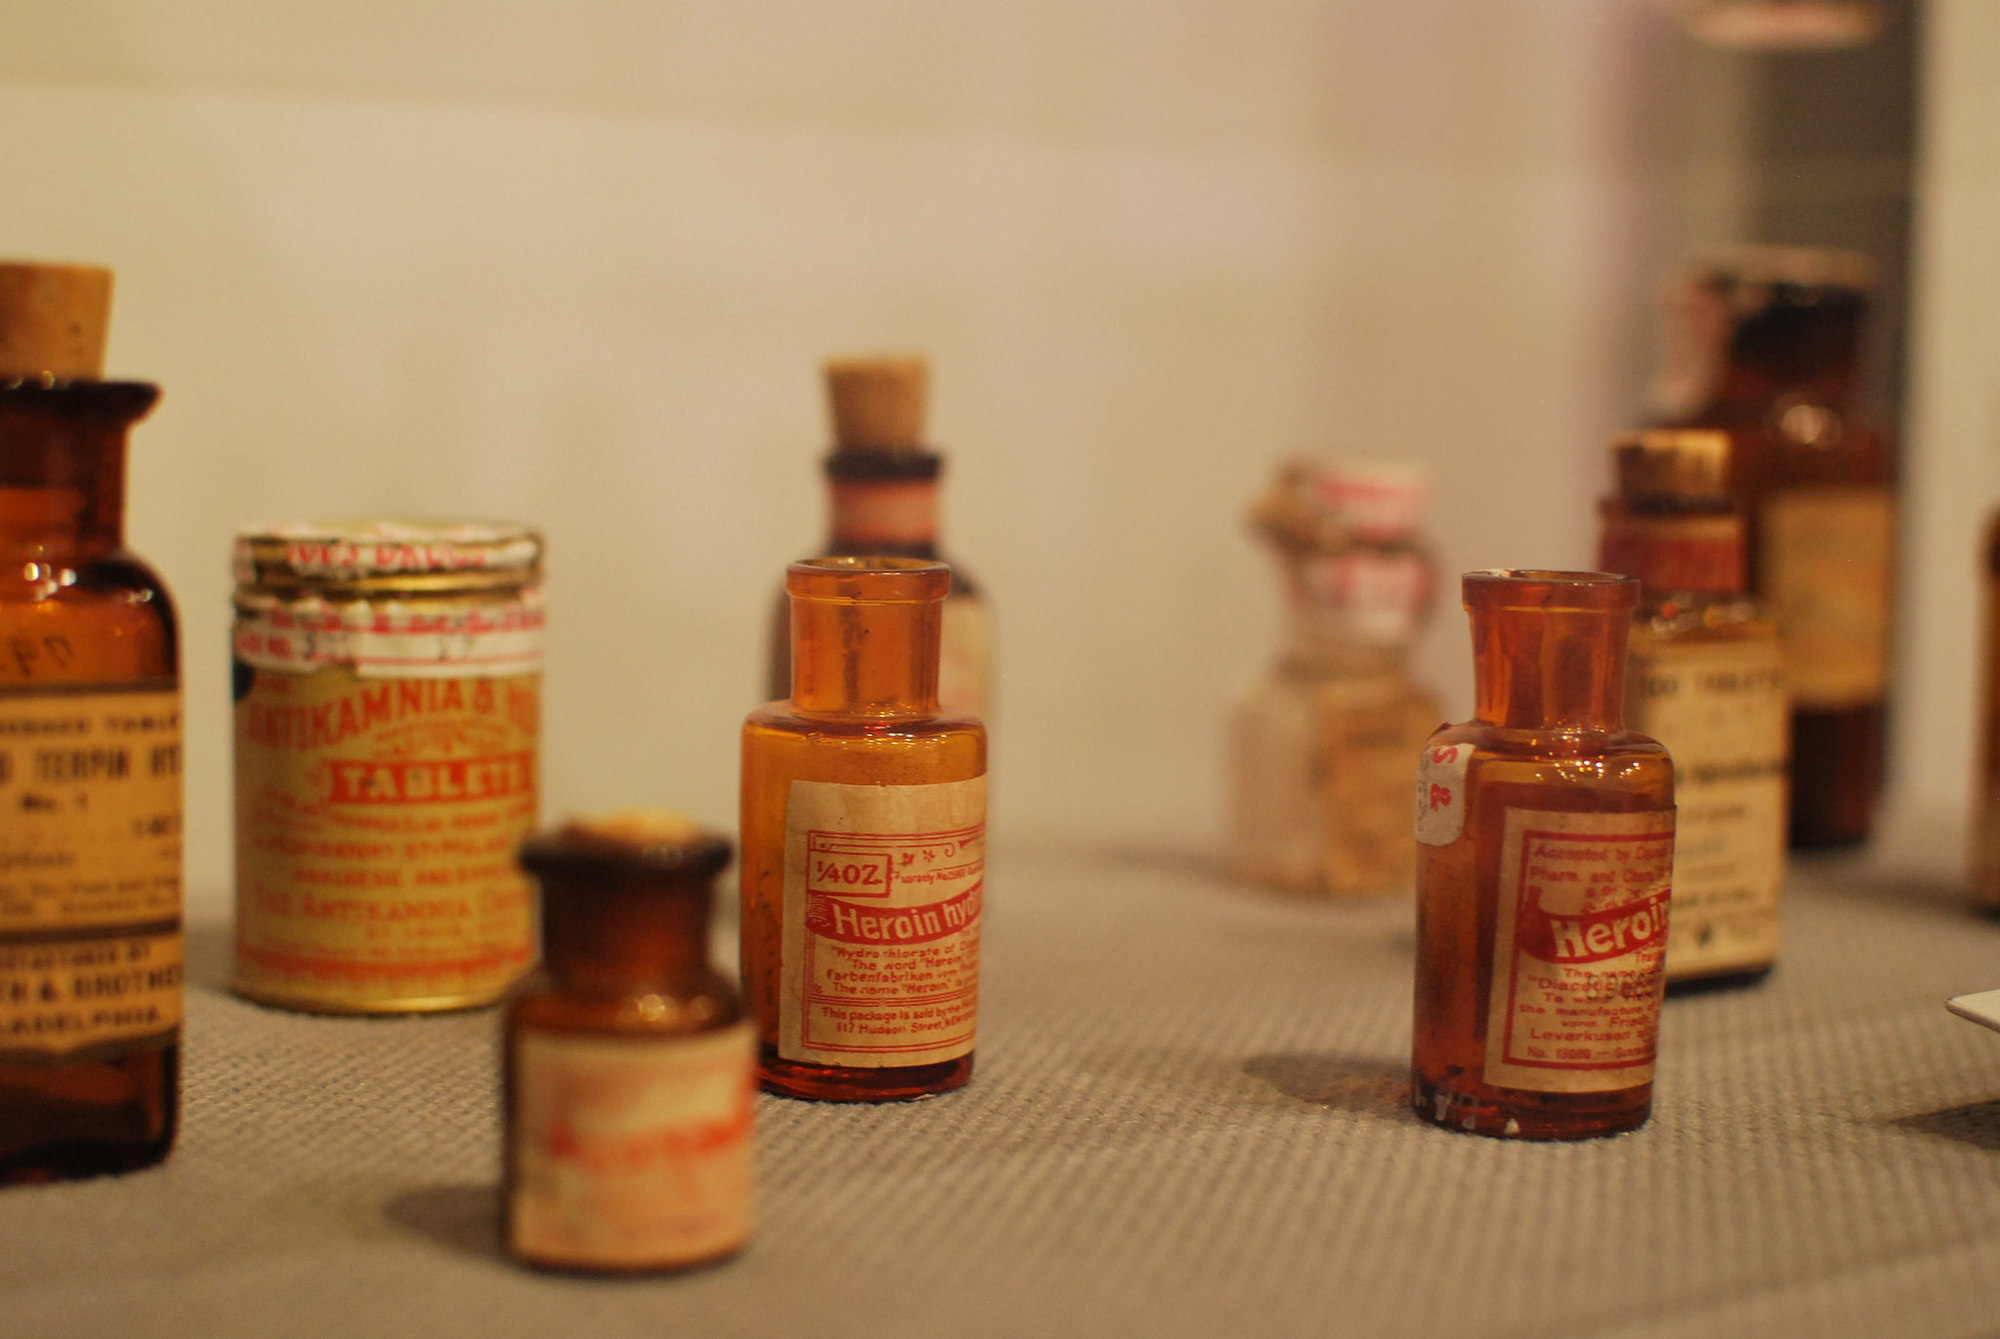 Heroin was once prescribed by doctors